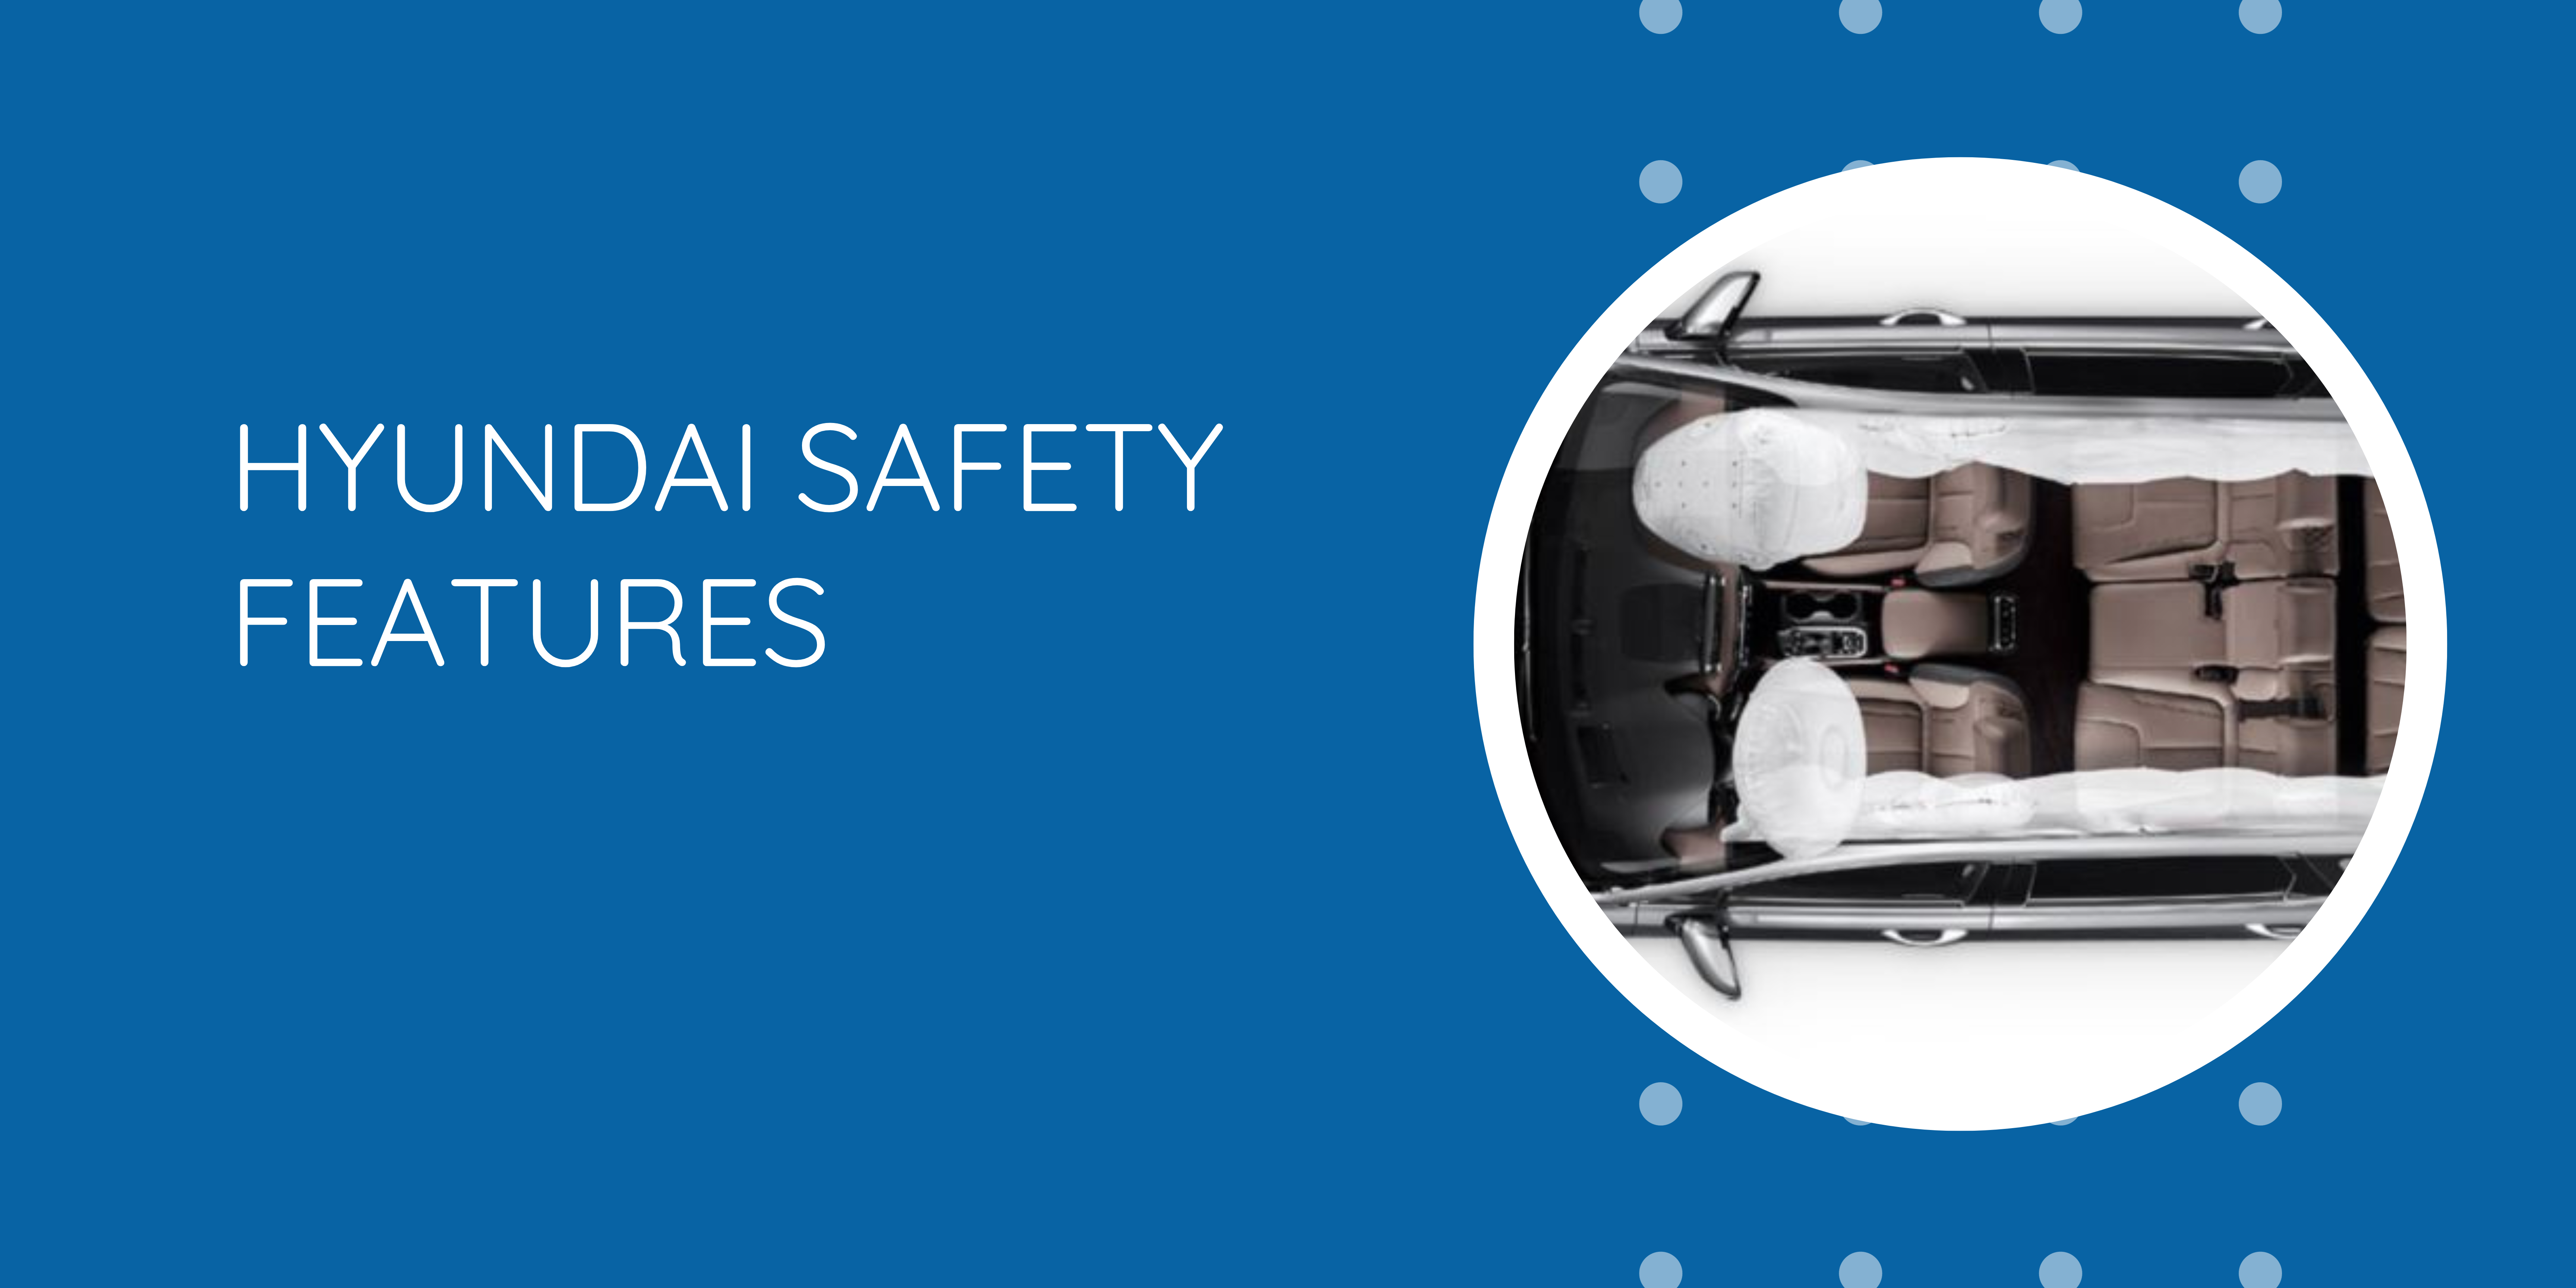 Hyundai Safety Features